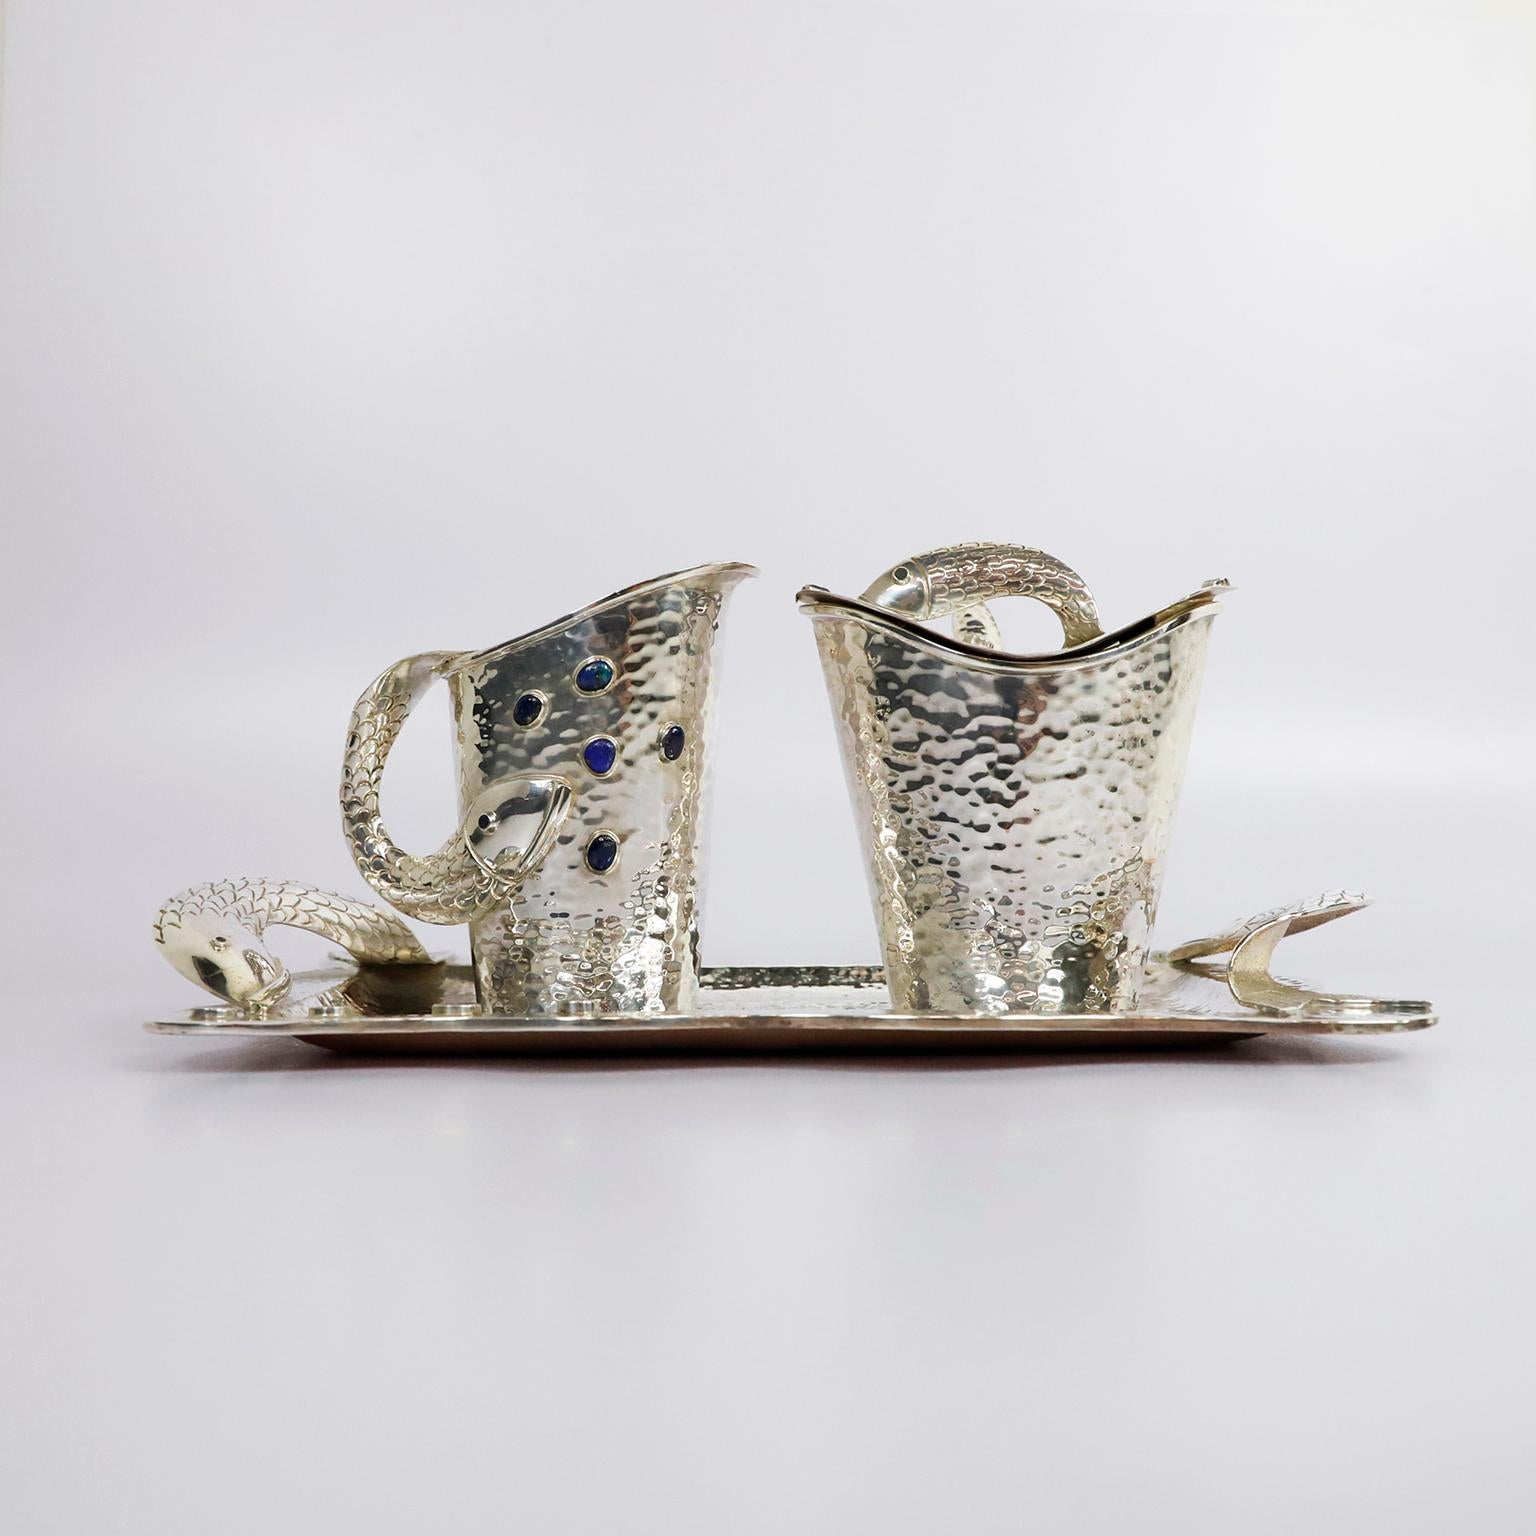 Circa 1960. We offer this Serving set by 